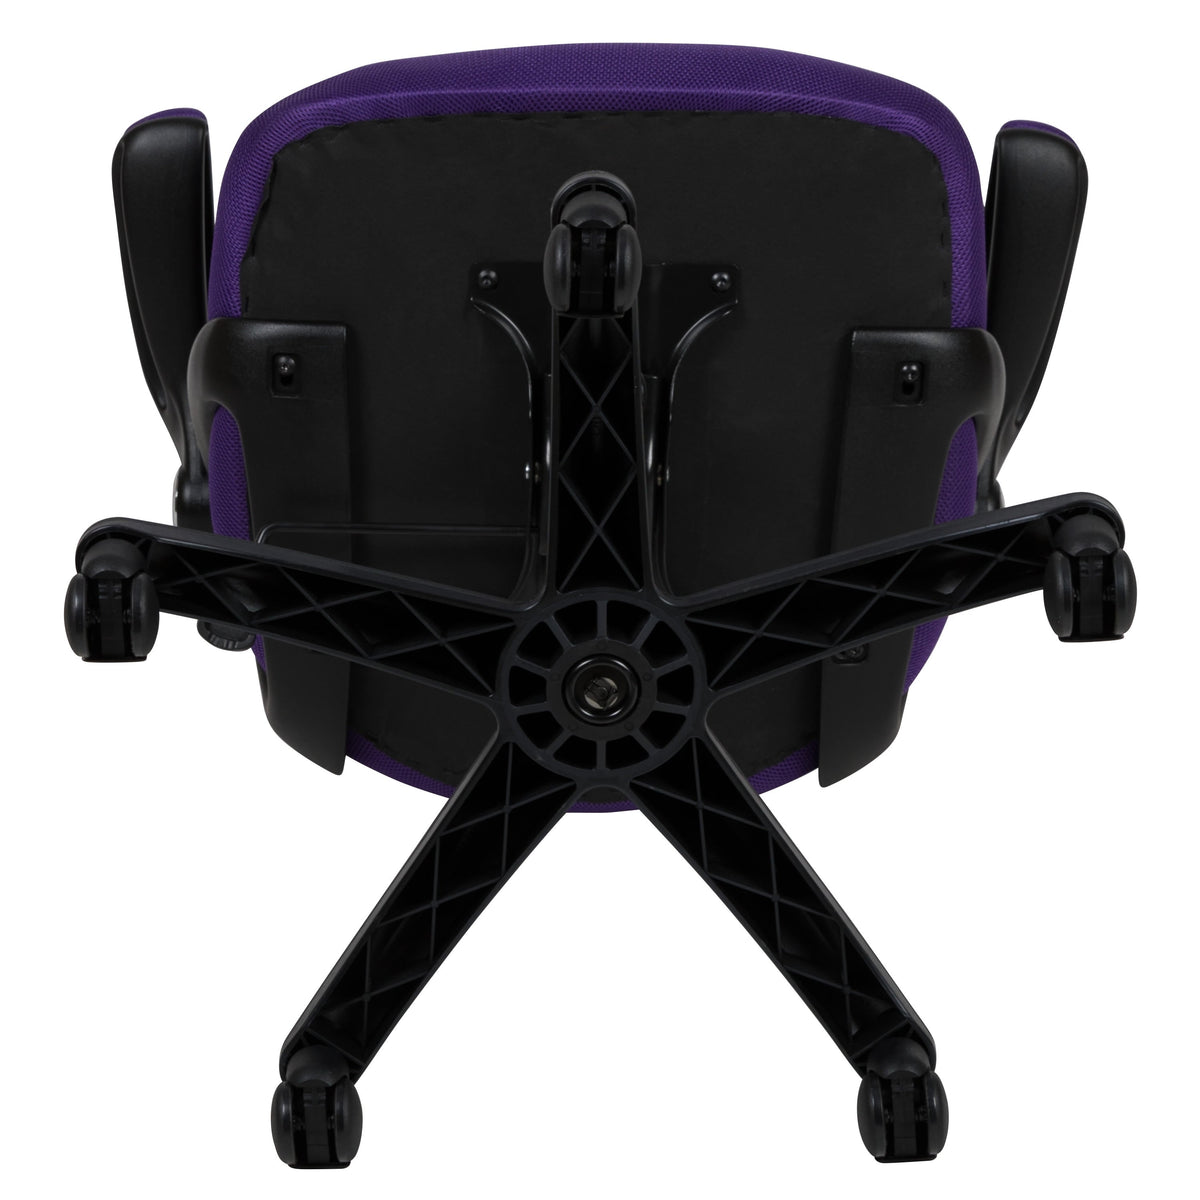 Purple |#| High Back Purple Mesh Ergonomic Office Chair with Black Frame and Flip-up Arms